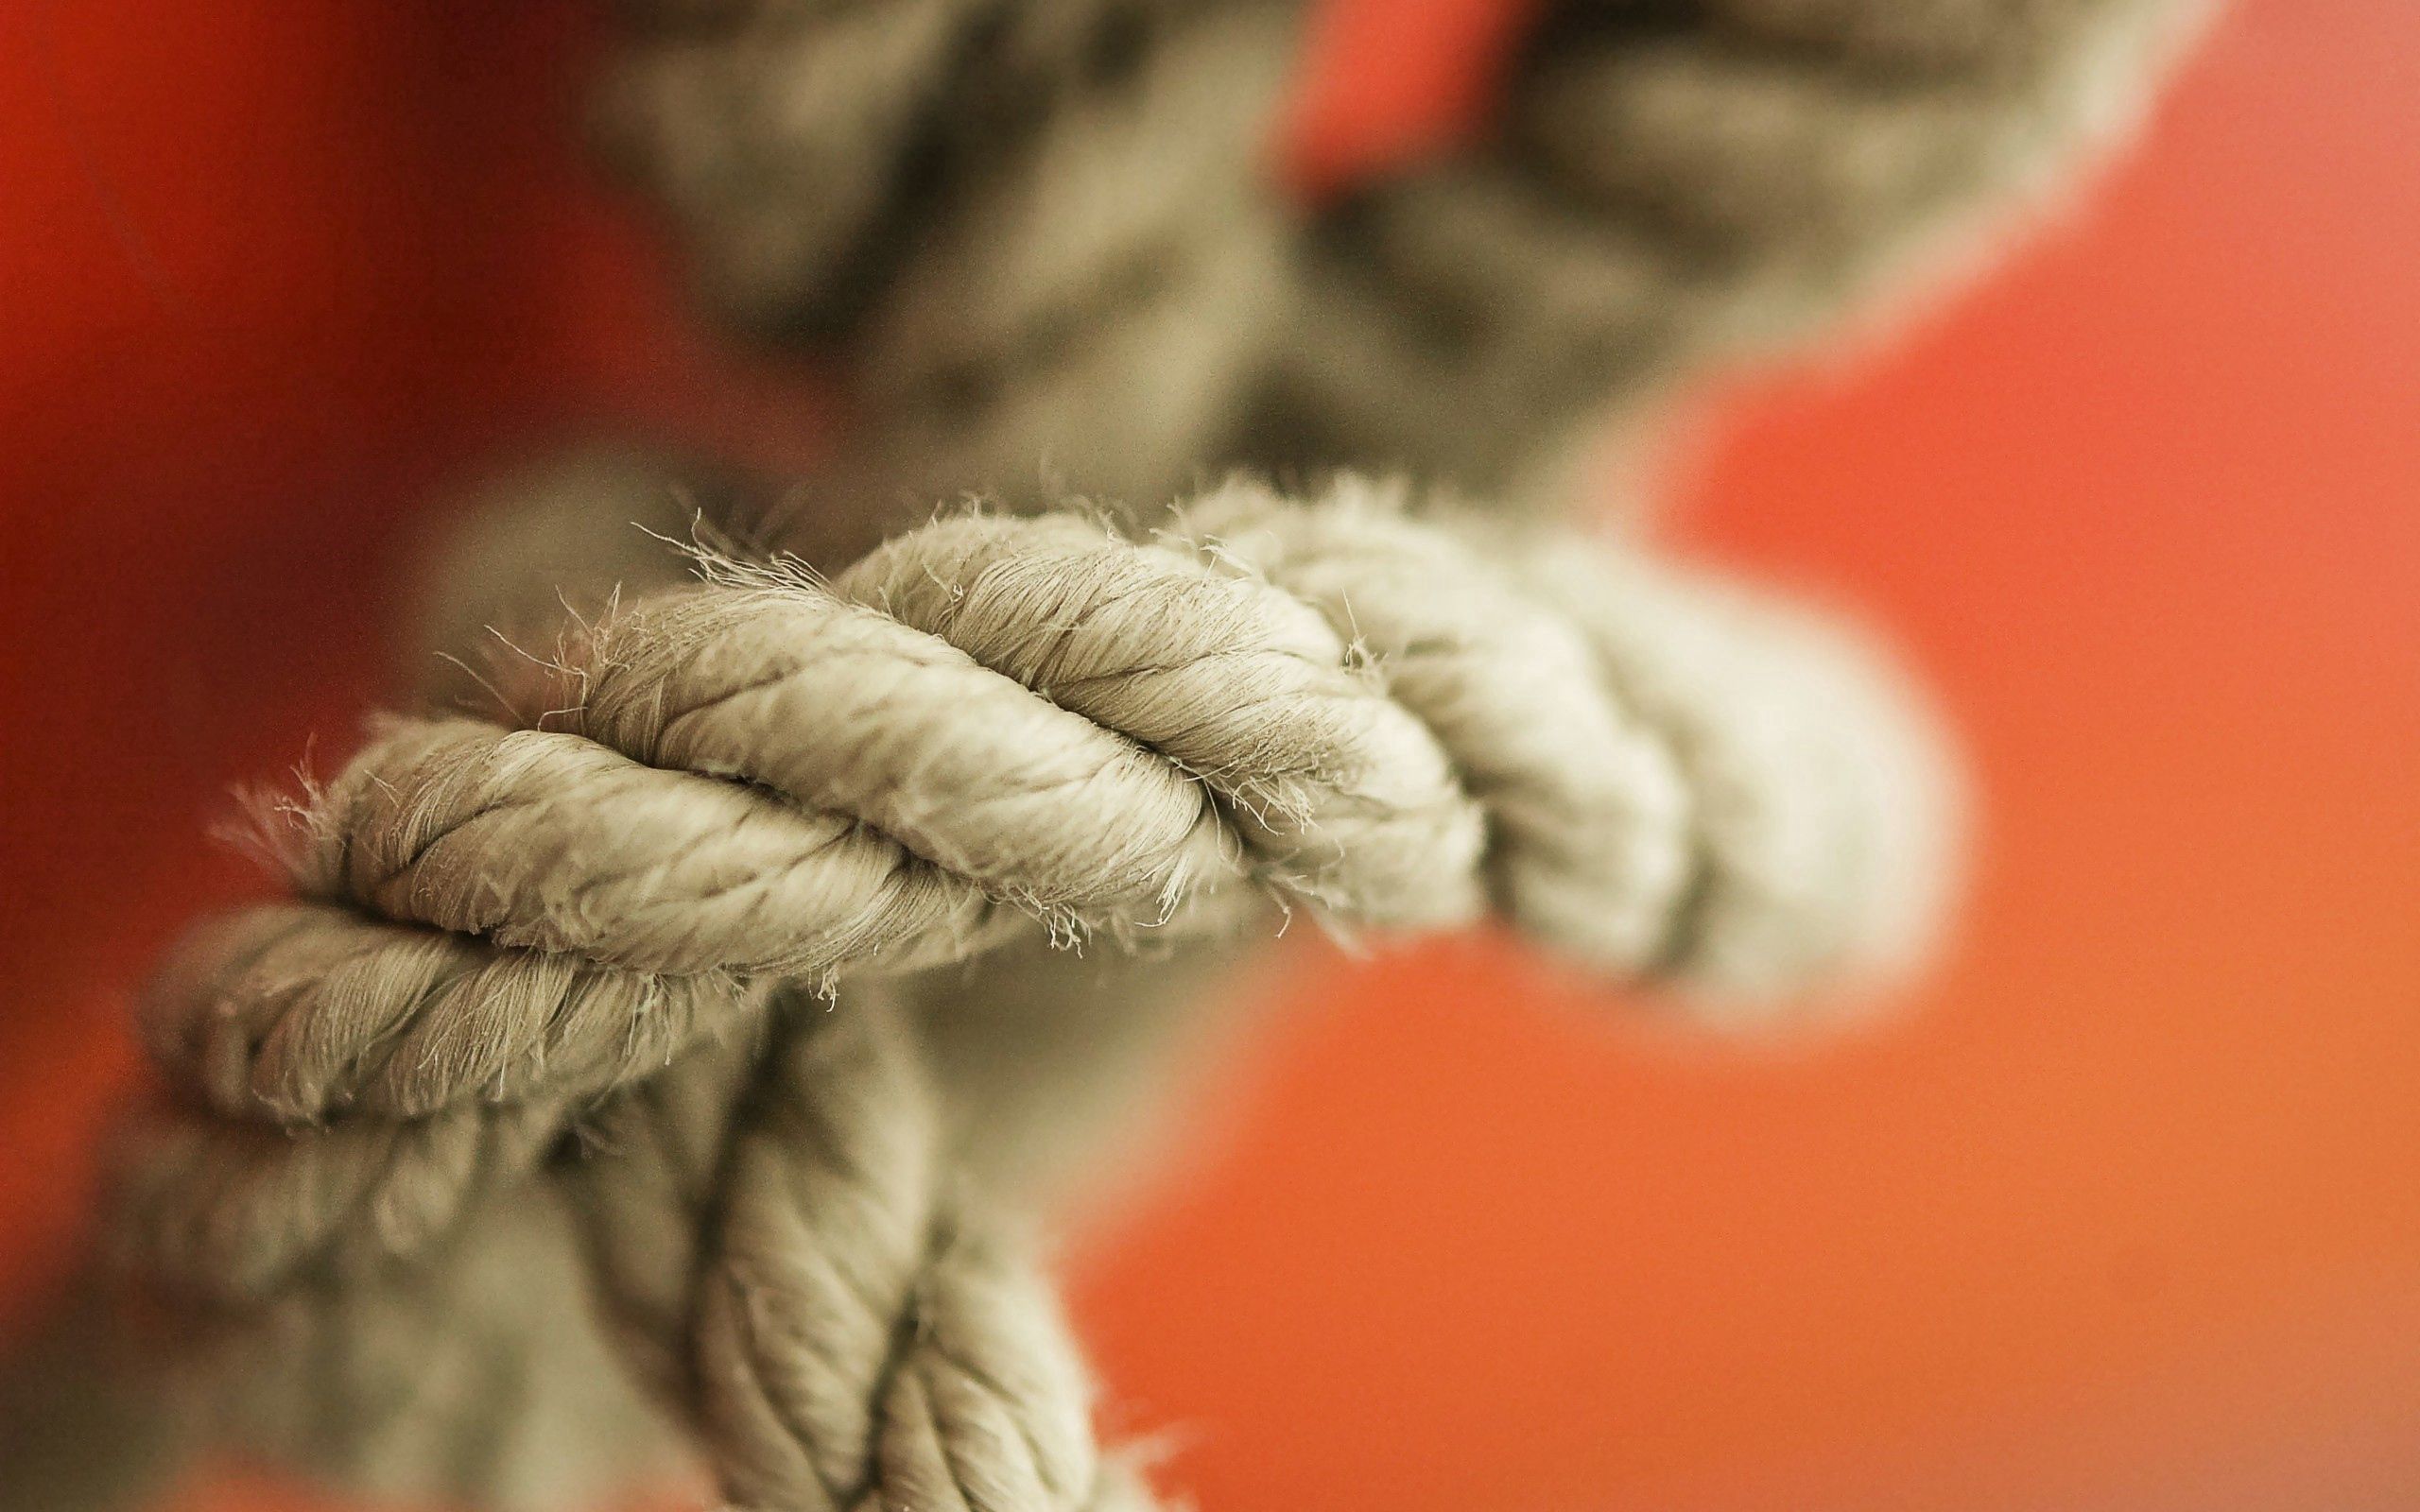 miscellanea, miscellaneous, blur, smooth, cable, rope